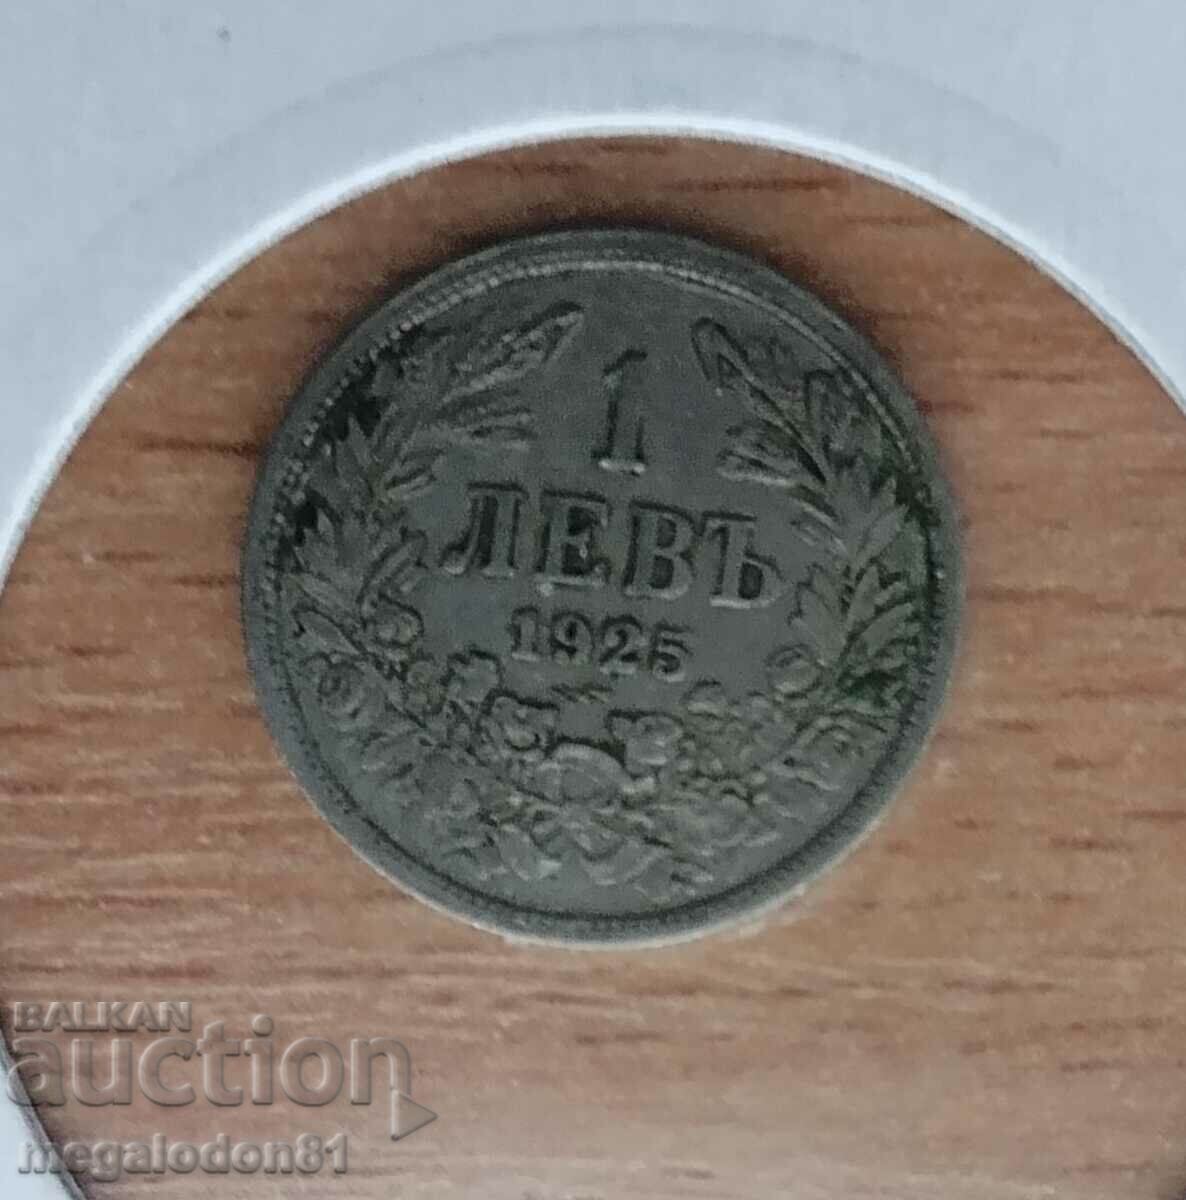 Bulgaria - 1 lev 1925, with line